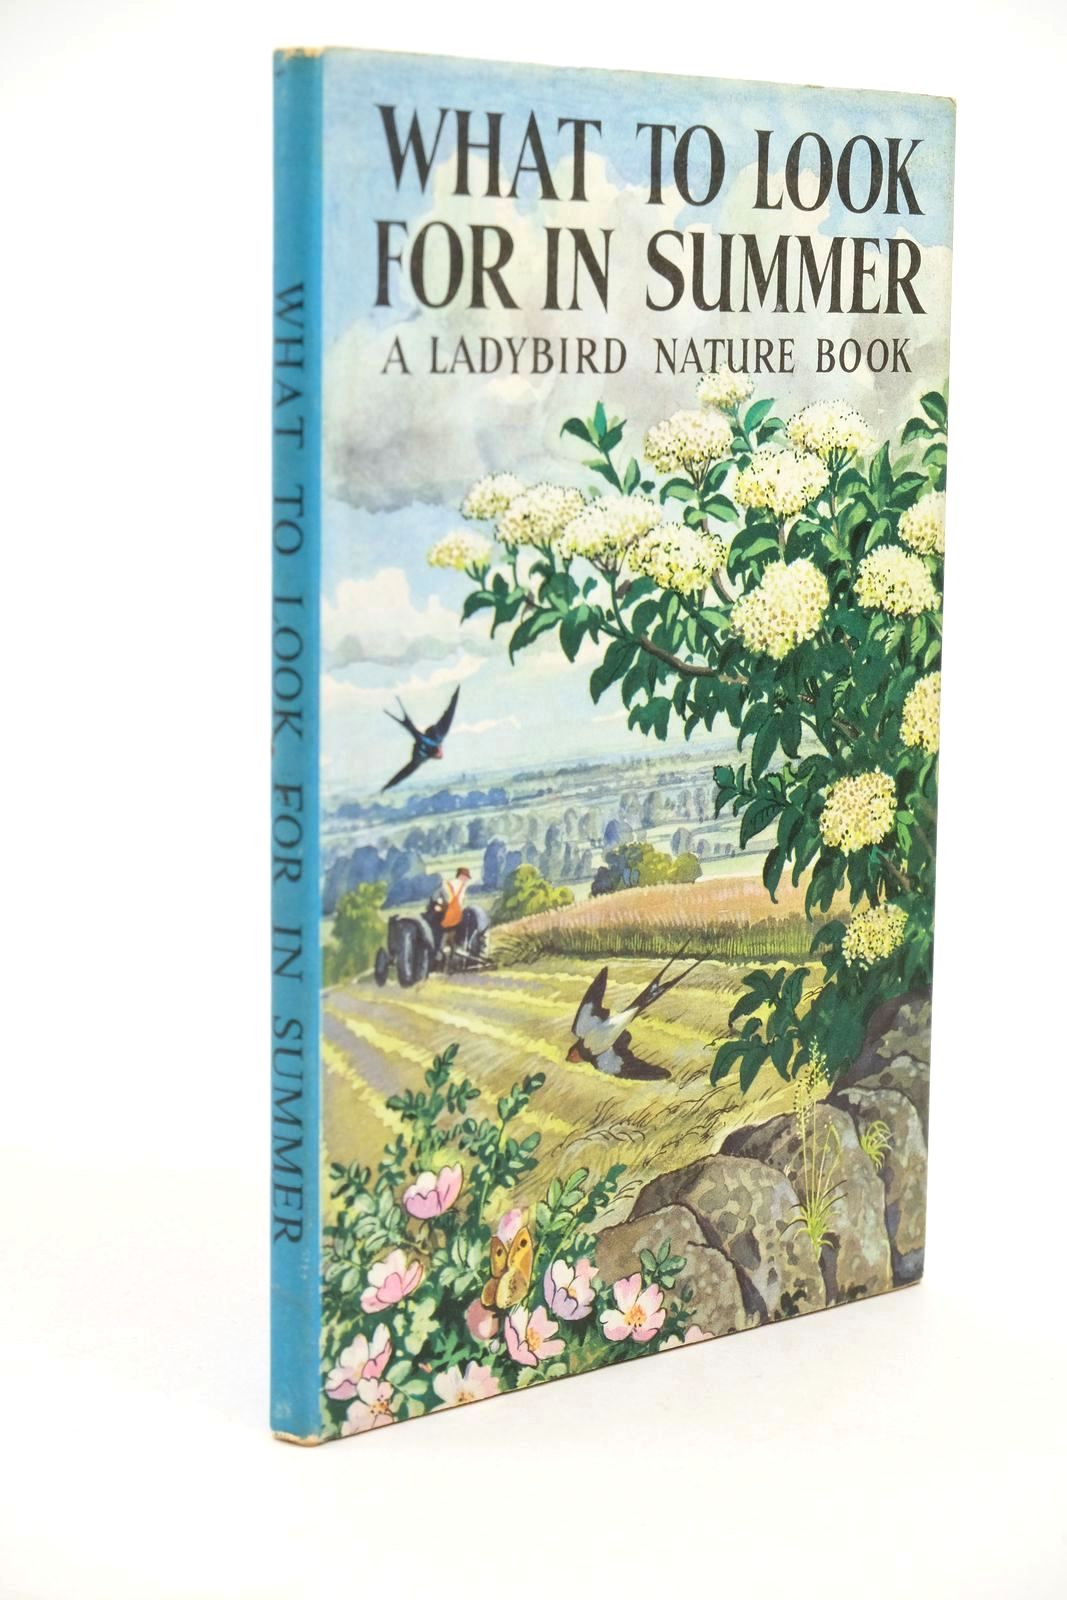 Photo of WHAT TO LOOK FOR IN SUMMER written by Watson, E.L. Grant illustrated by Tunnicliffe, C.F. published by Wills &amp; Hepworth Ltd. (STOCK CODE: 1323145)  for sale by Stella & Rose's Books